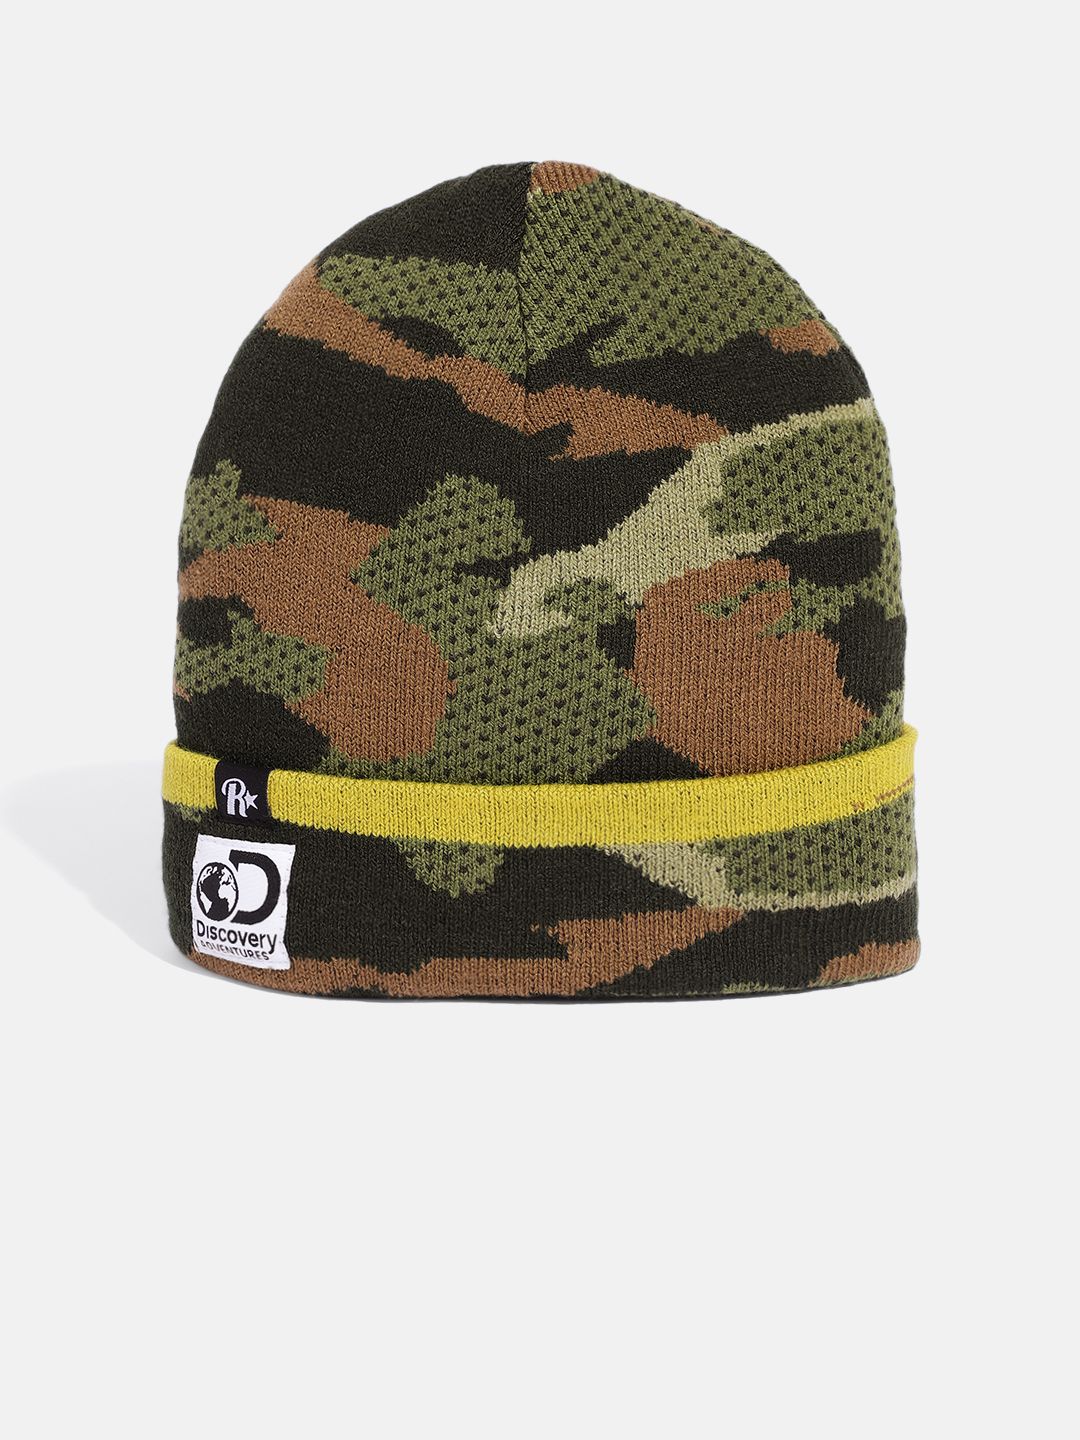 Roadster x Discovery Adventures Unisex Olive Green & Black Camouflage Printed Beanie Price in India